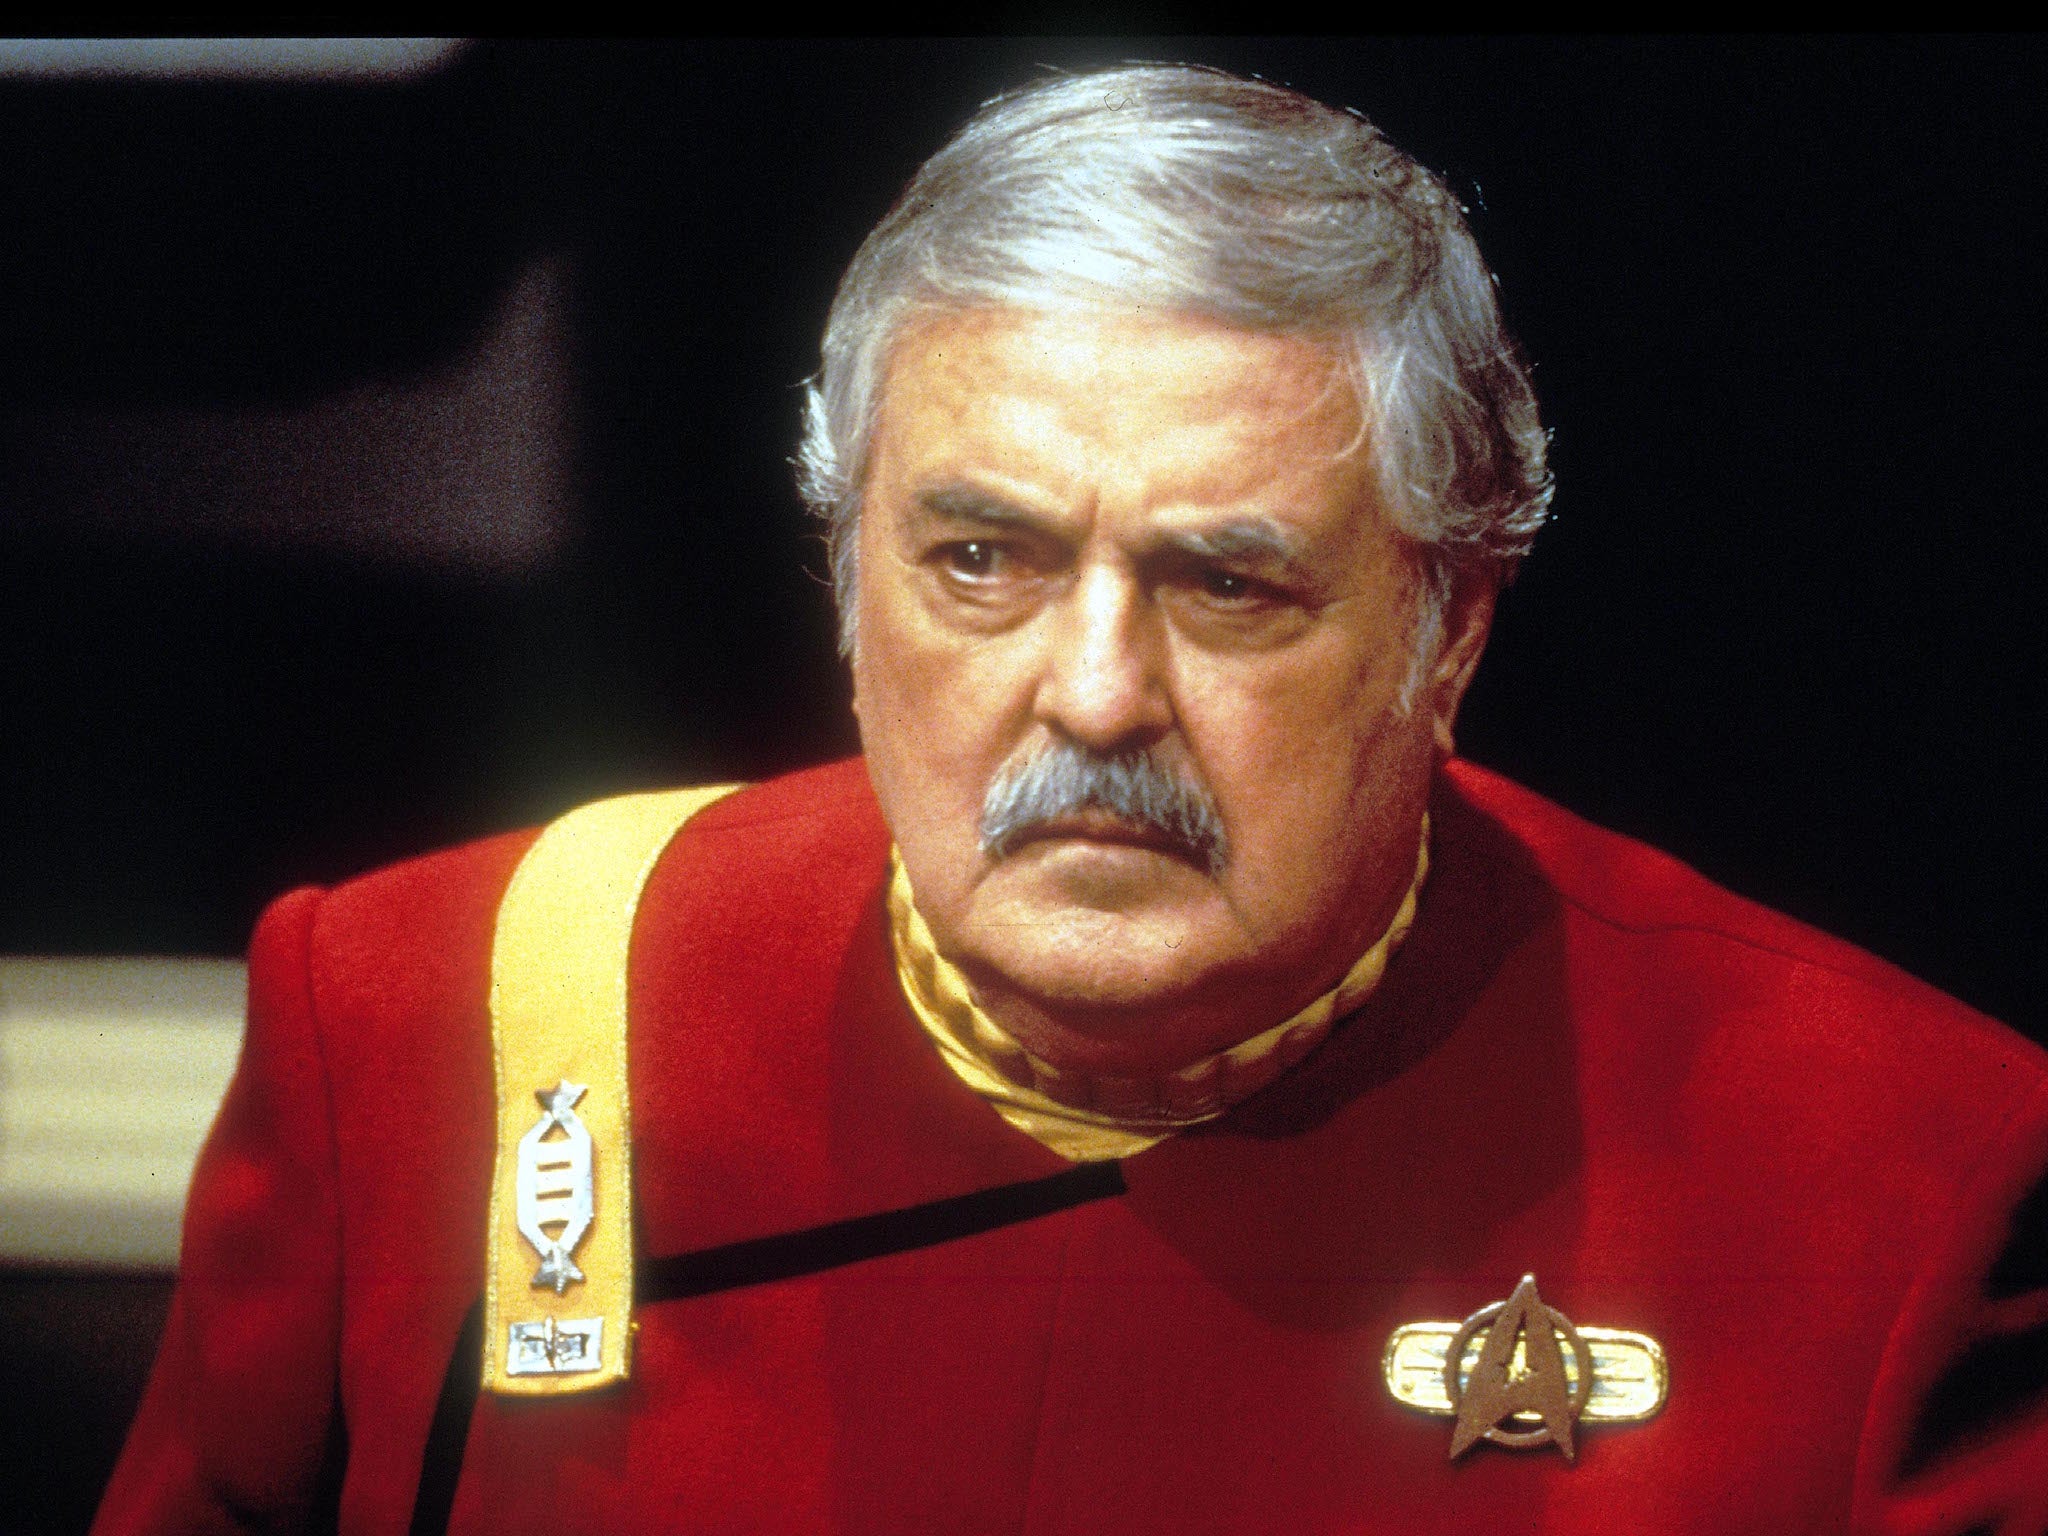 Ashes of Star Trek ‘Scotty’, actor James Doohan, smuggled aboard the International Space Station: ‘He always wanted to go to space’